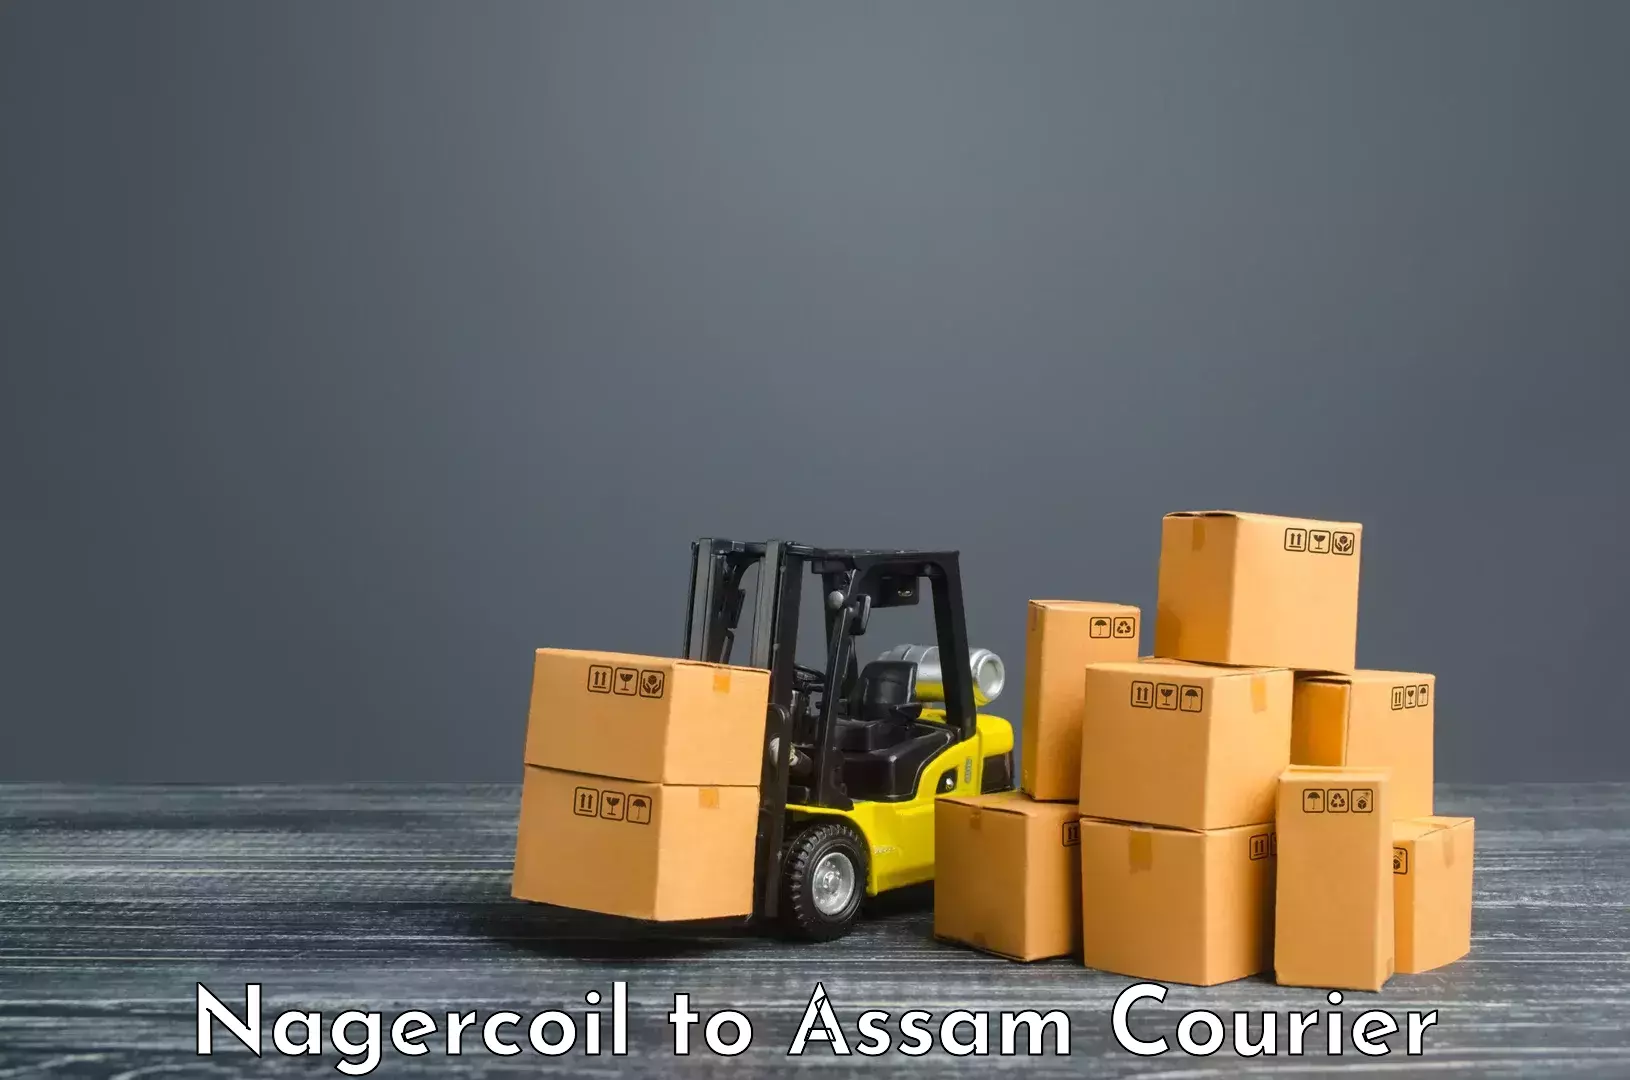 Parcel delivery automation Nagercoil to Guwahati University